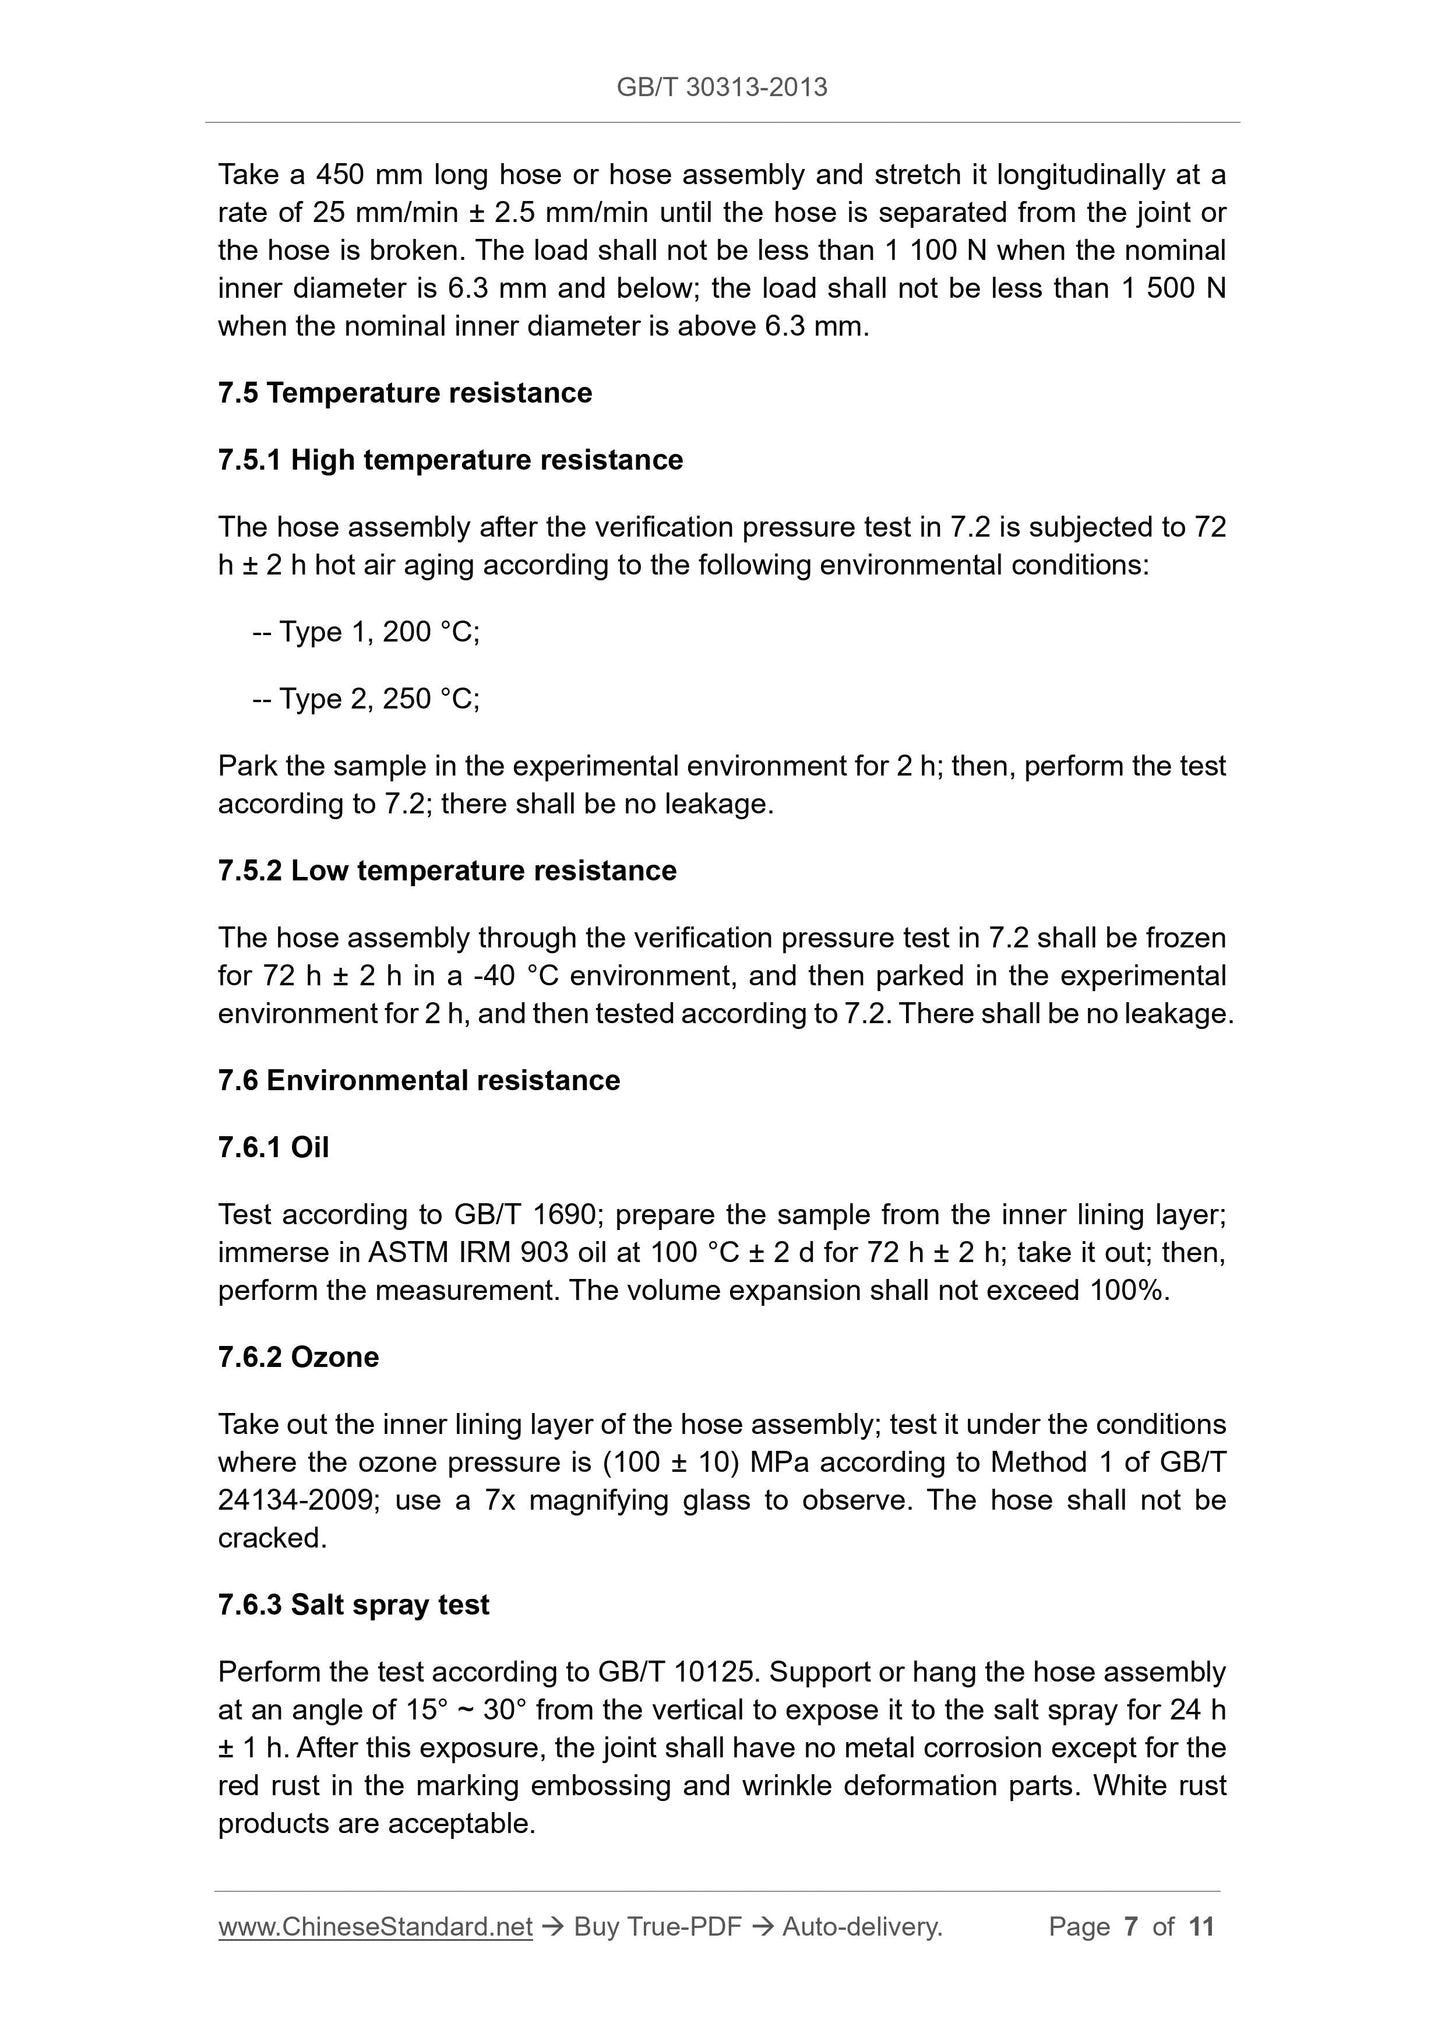 GB/T 30313-2013 Page 4